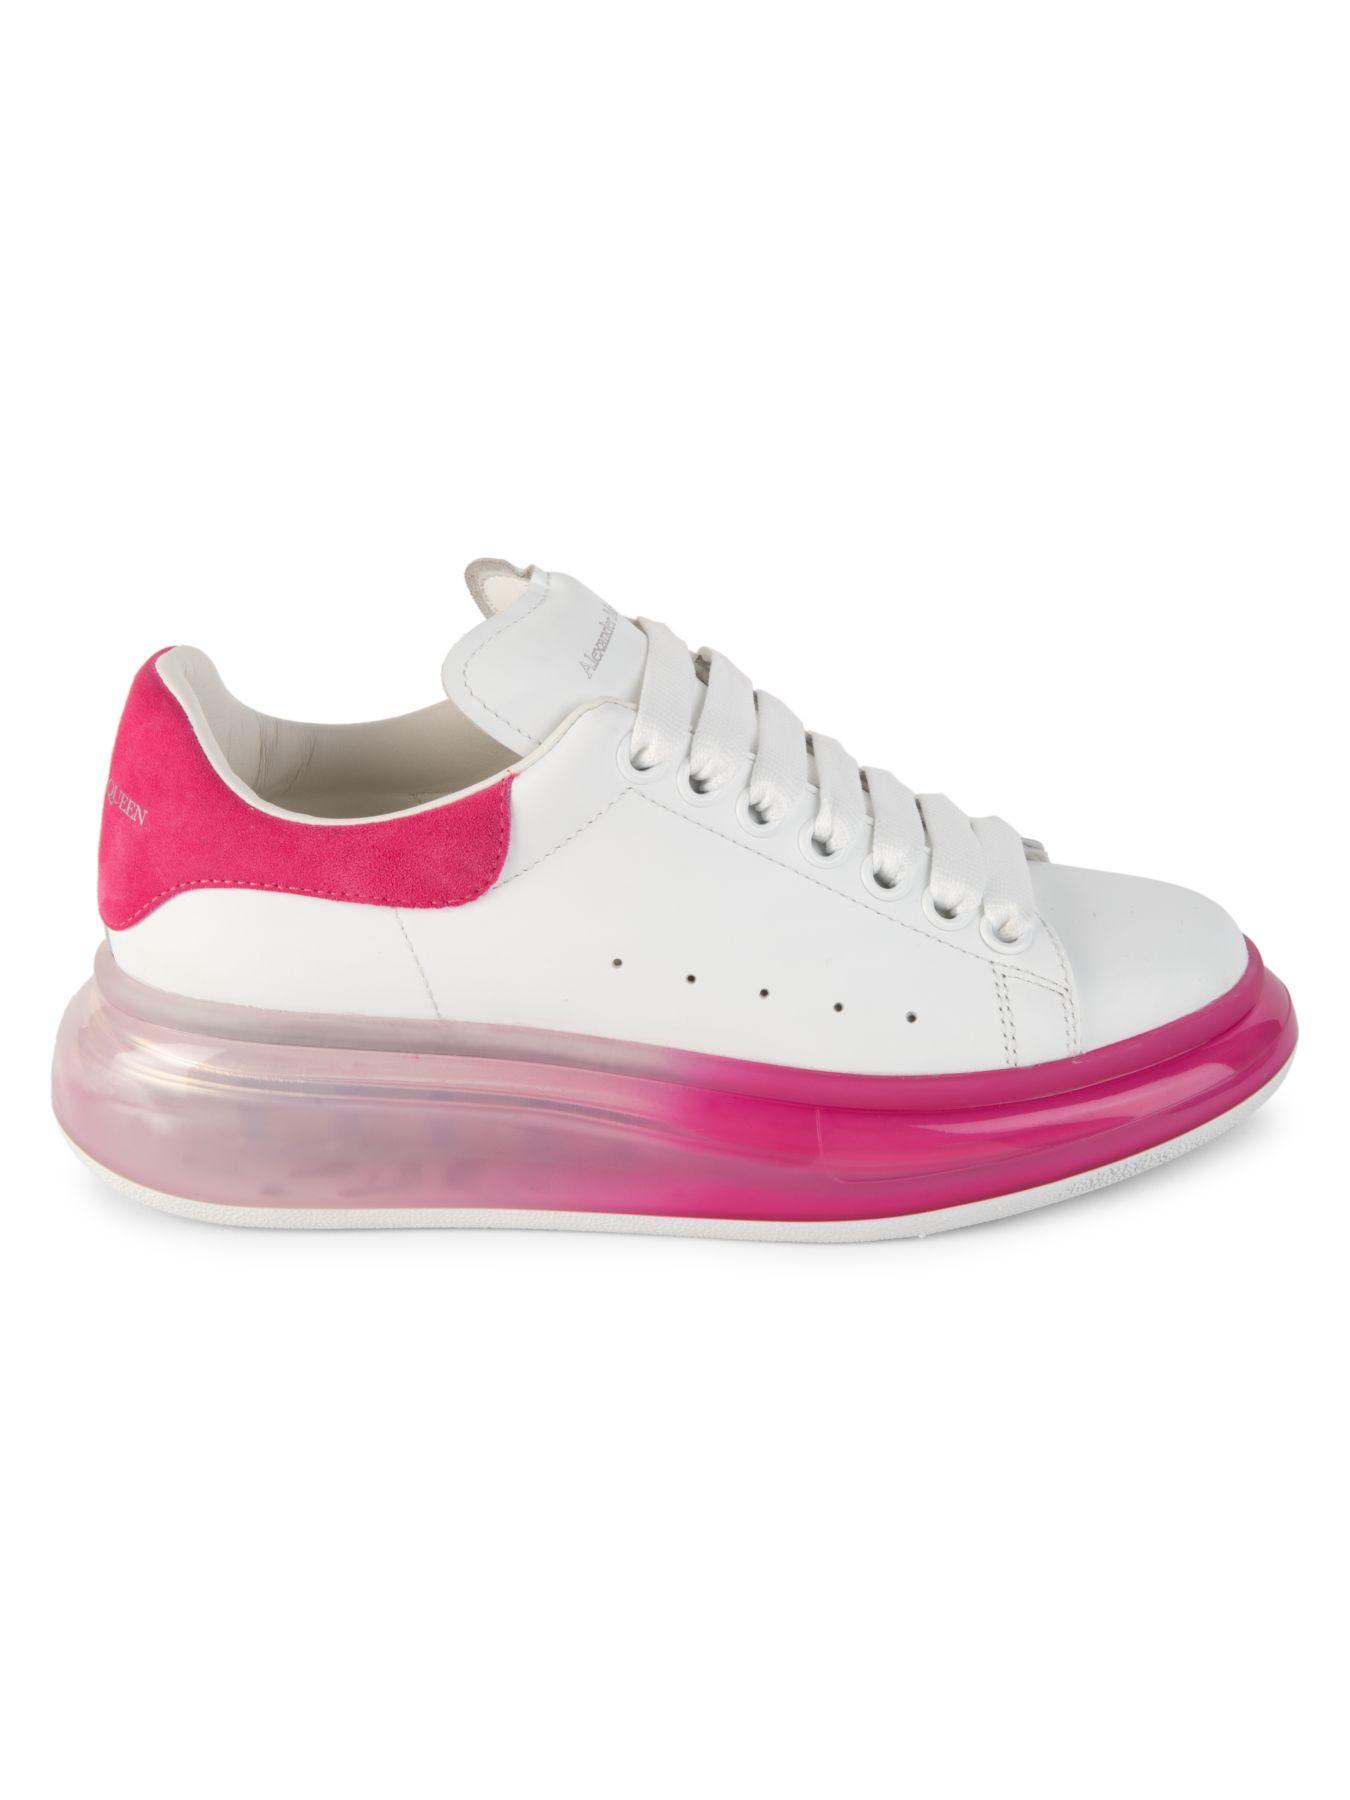 Alexander McQueen Transparent Sole Ombré Leather Sneakers in Pink - Lyst